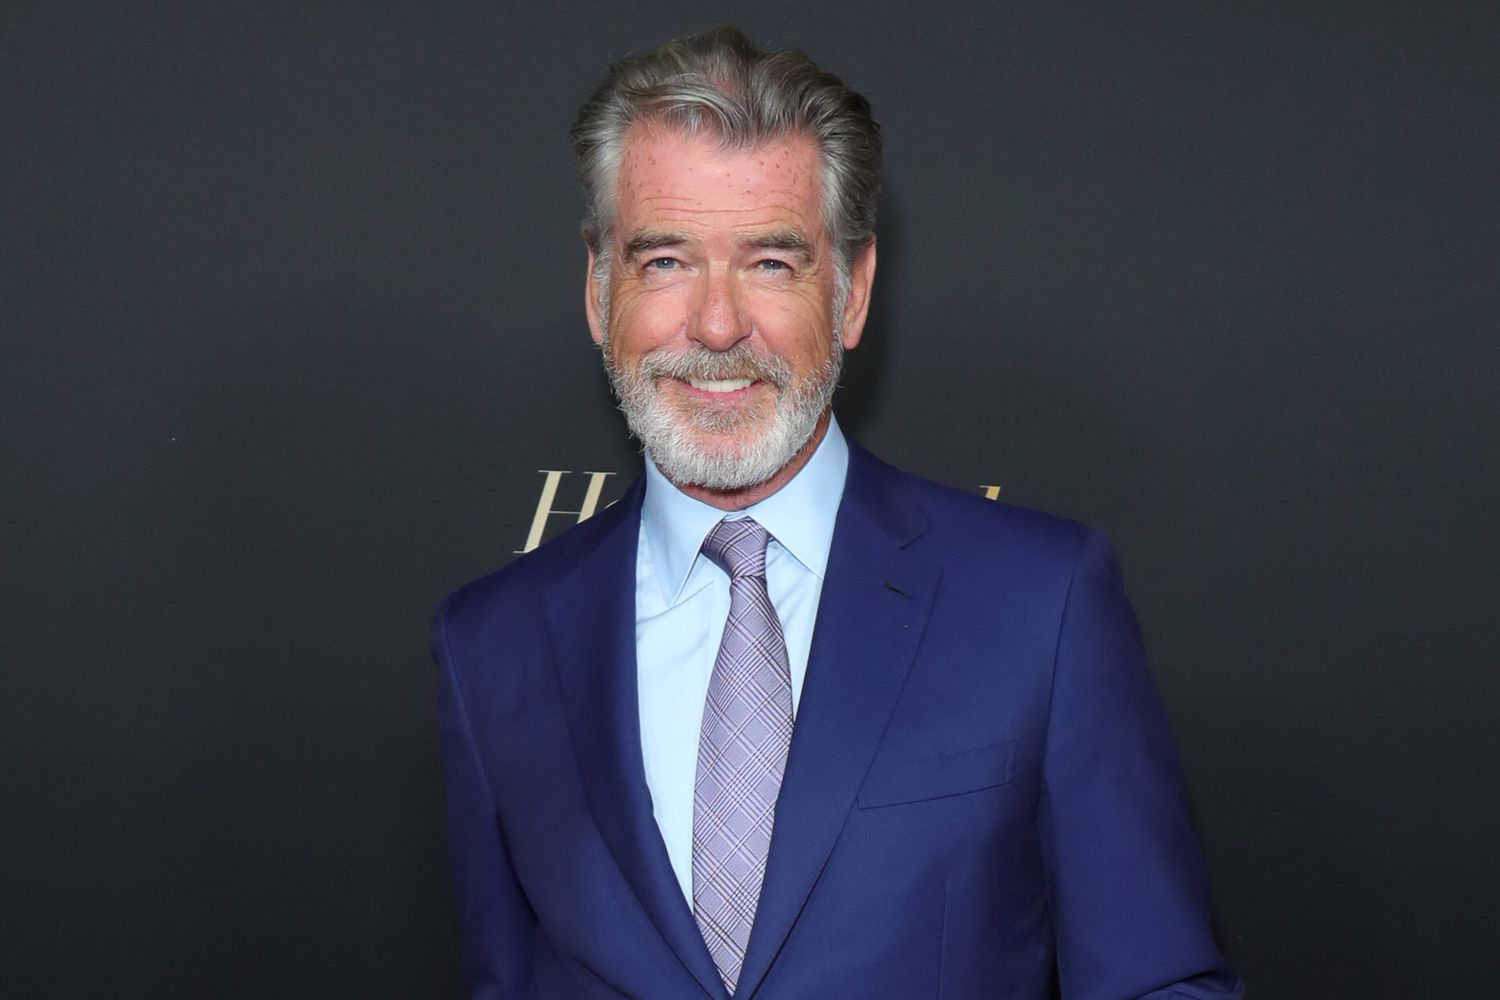 Pierce Brosnan weighs in on who should play James Bond next